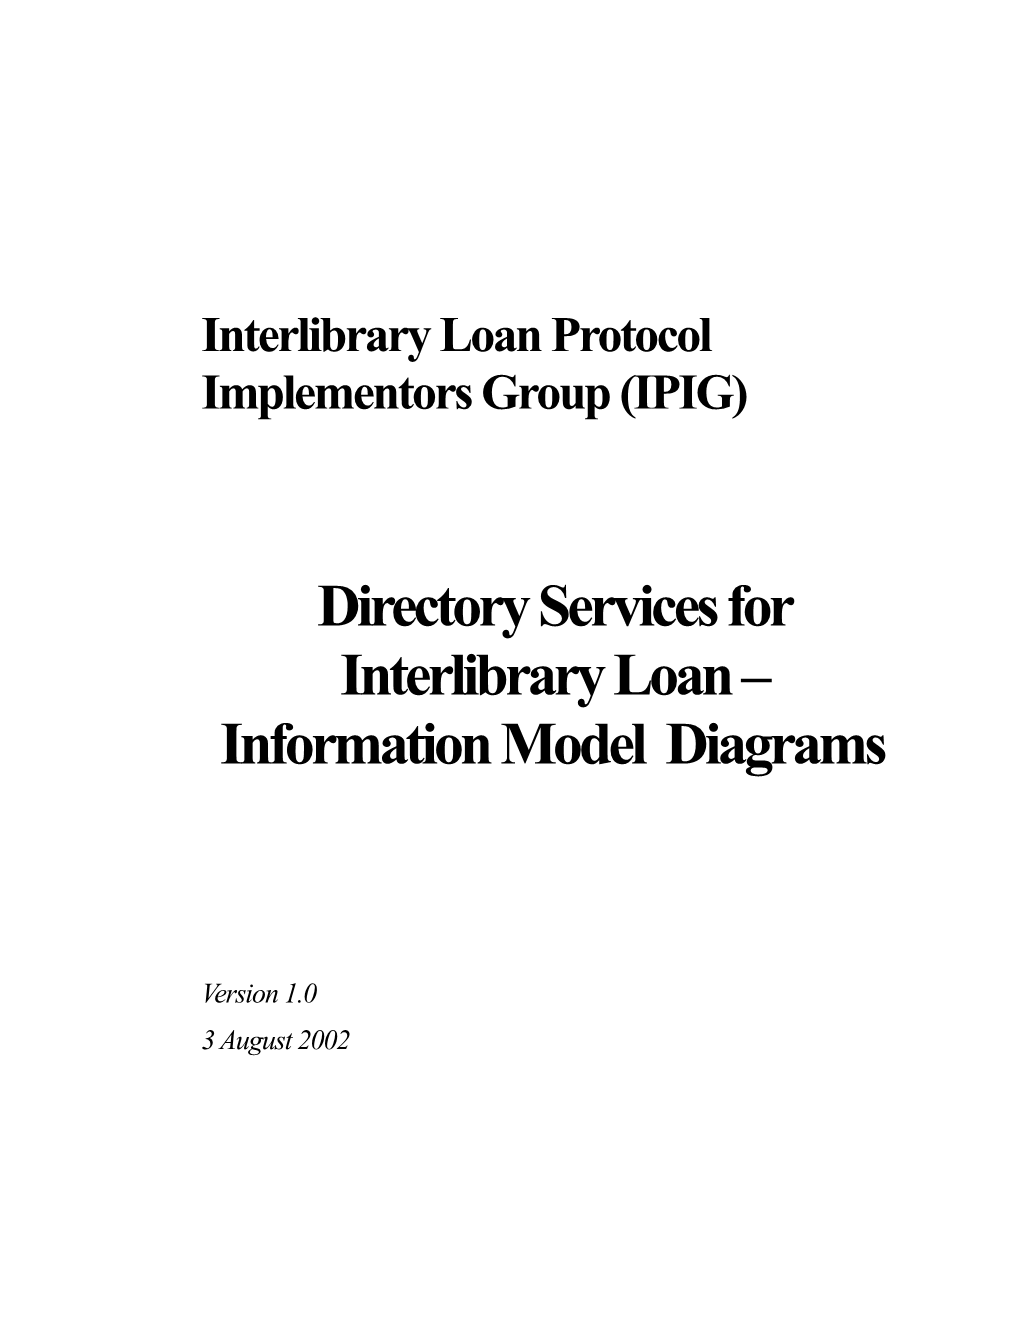 Interlibrary Loan Protocol Implementors Group (IPIG)